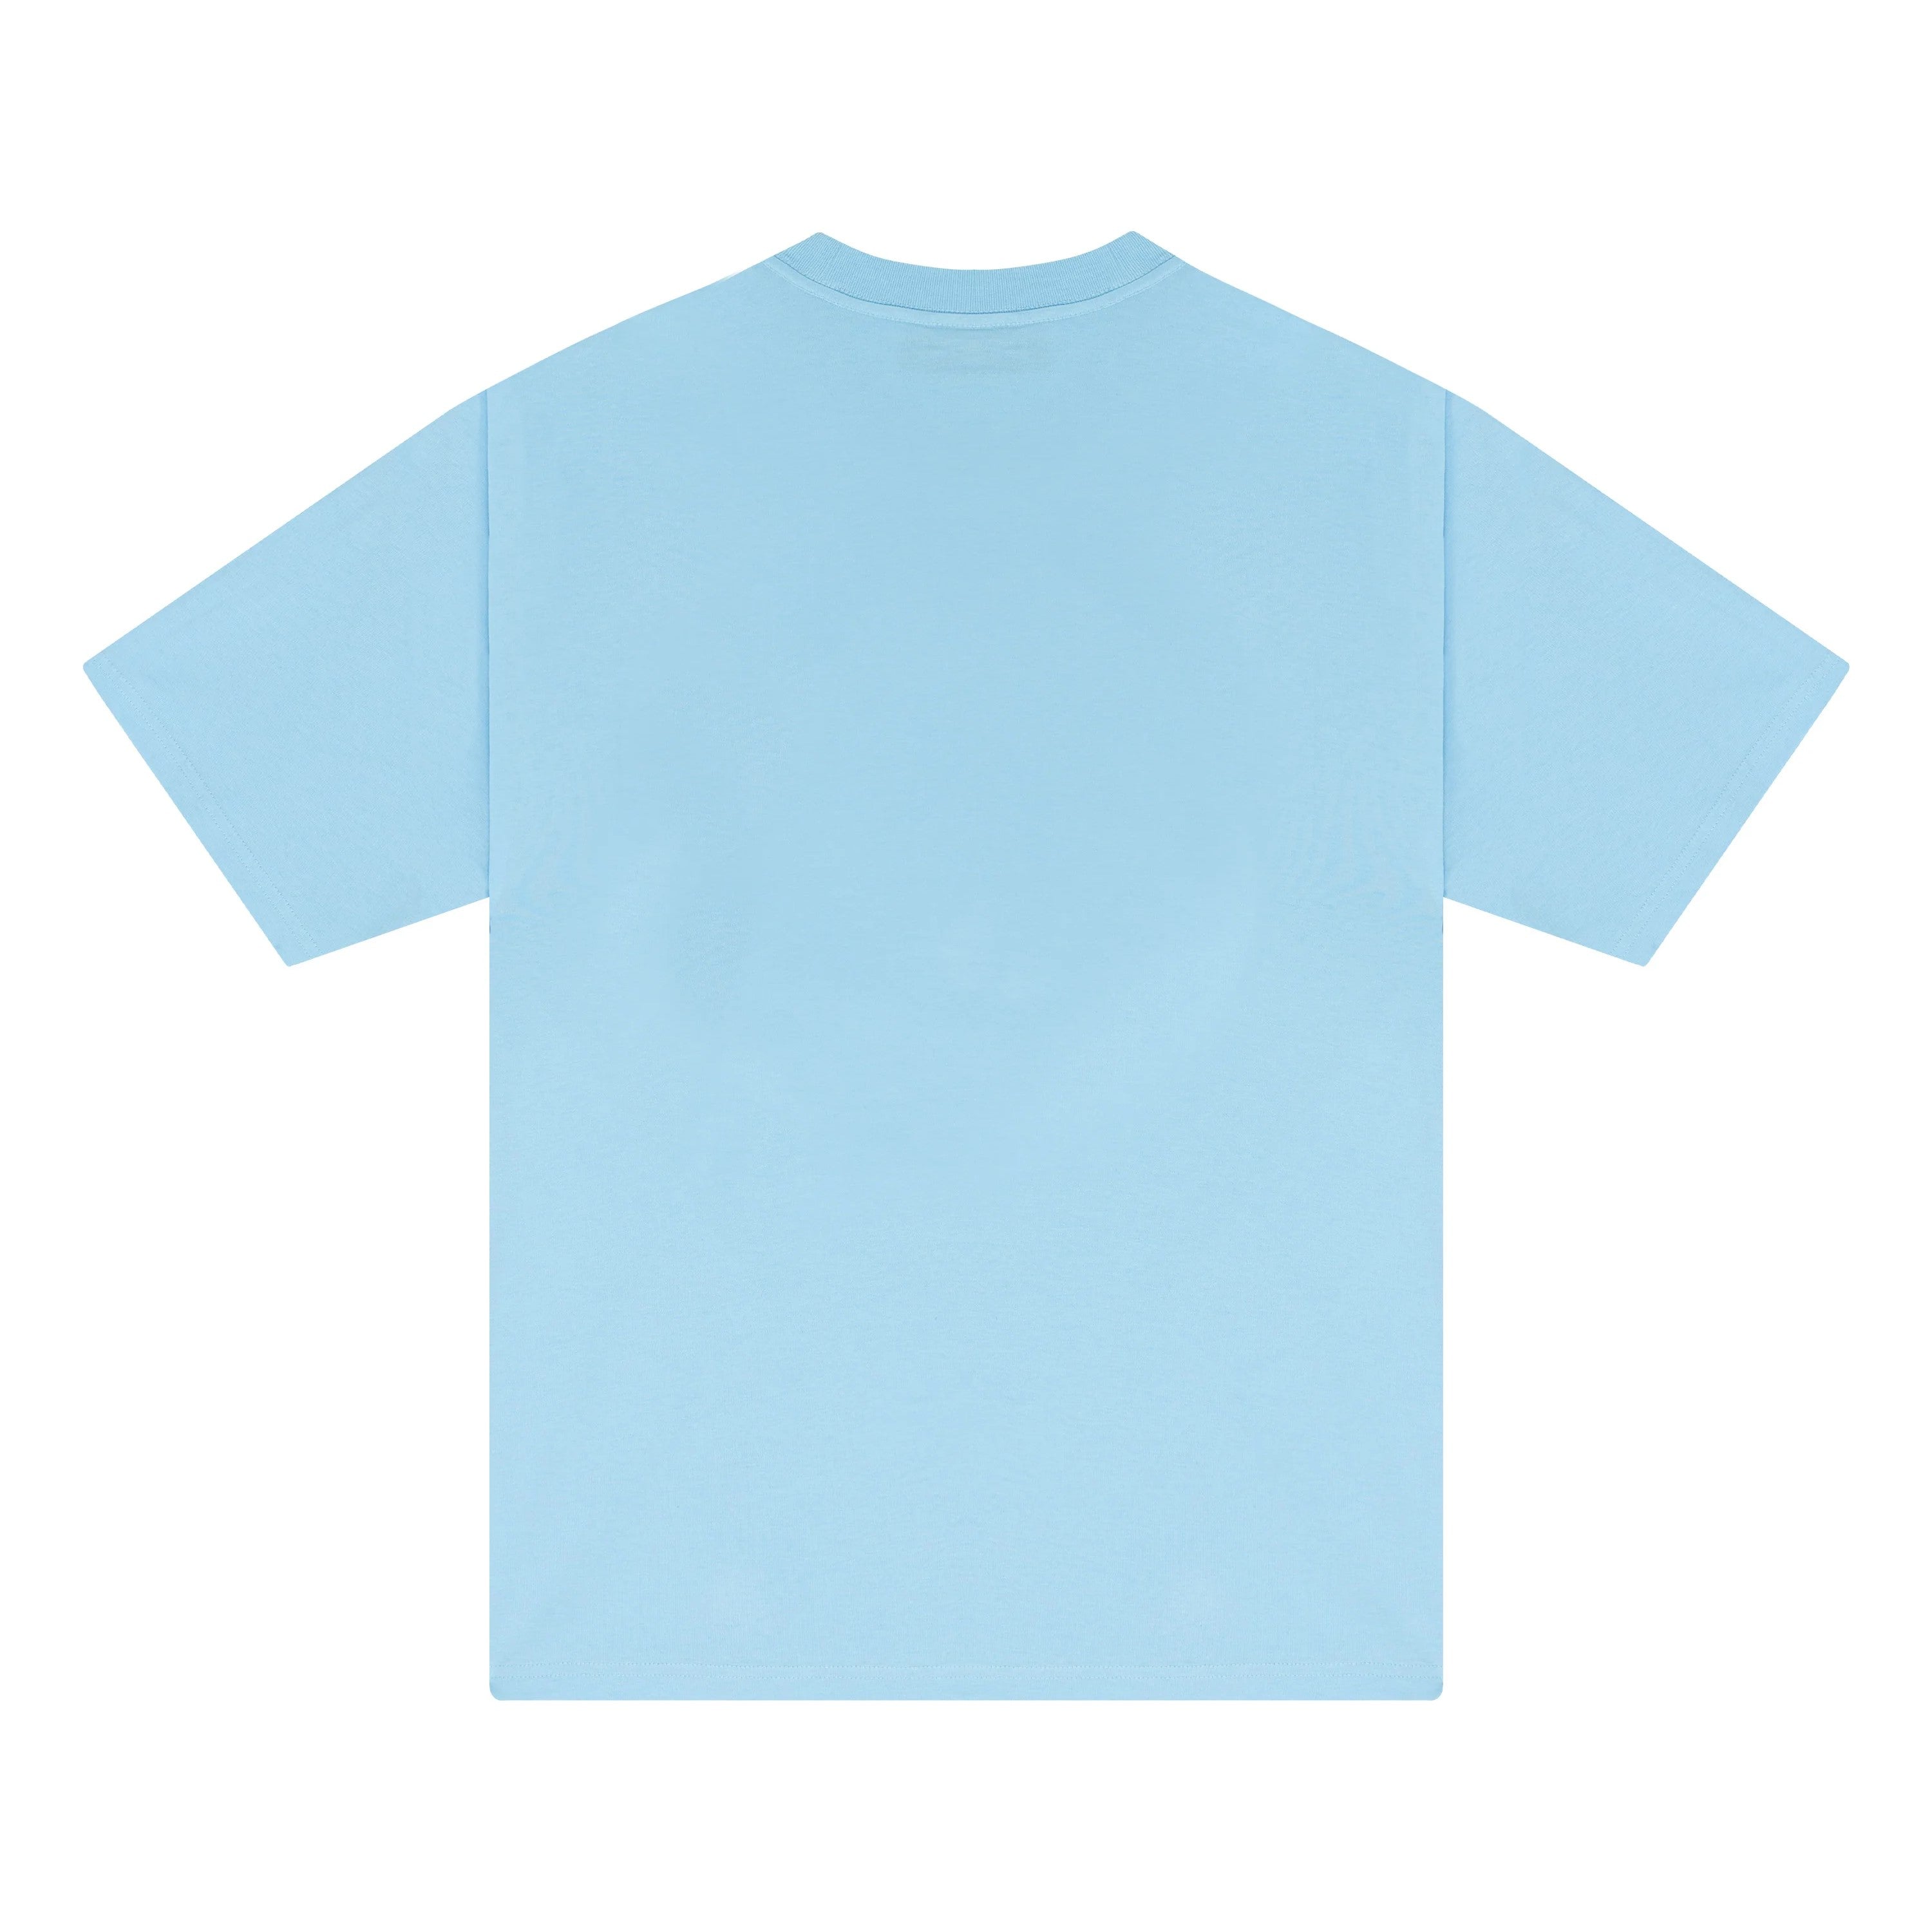 Drew House Mascot SS Tee - Pacific Blue